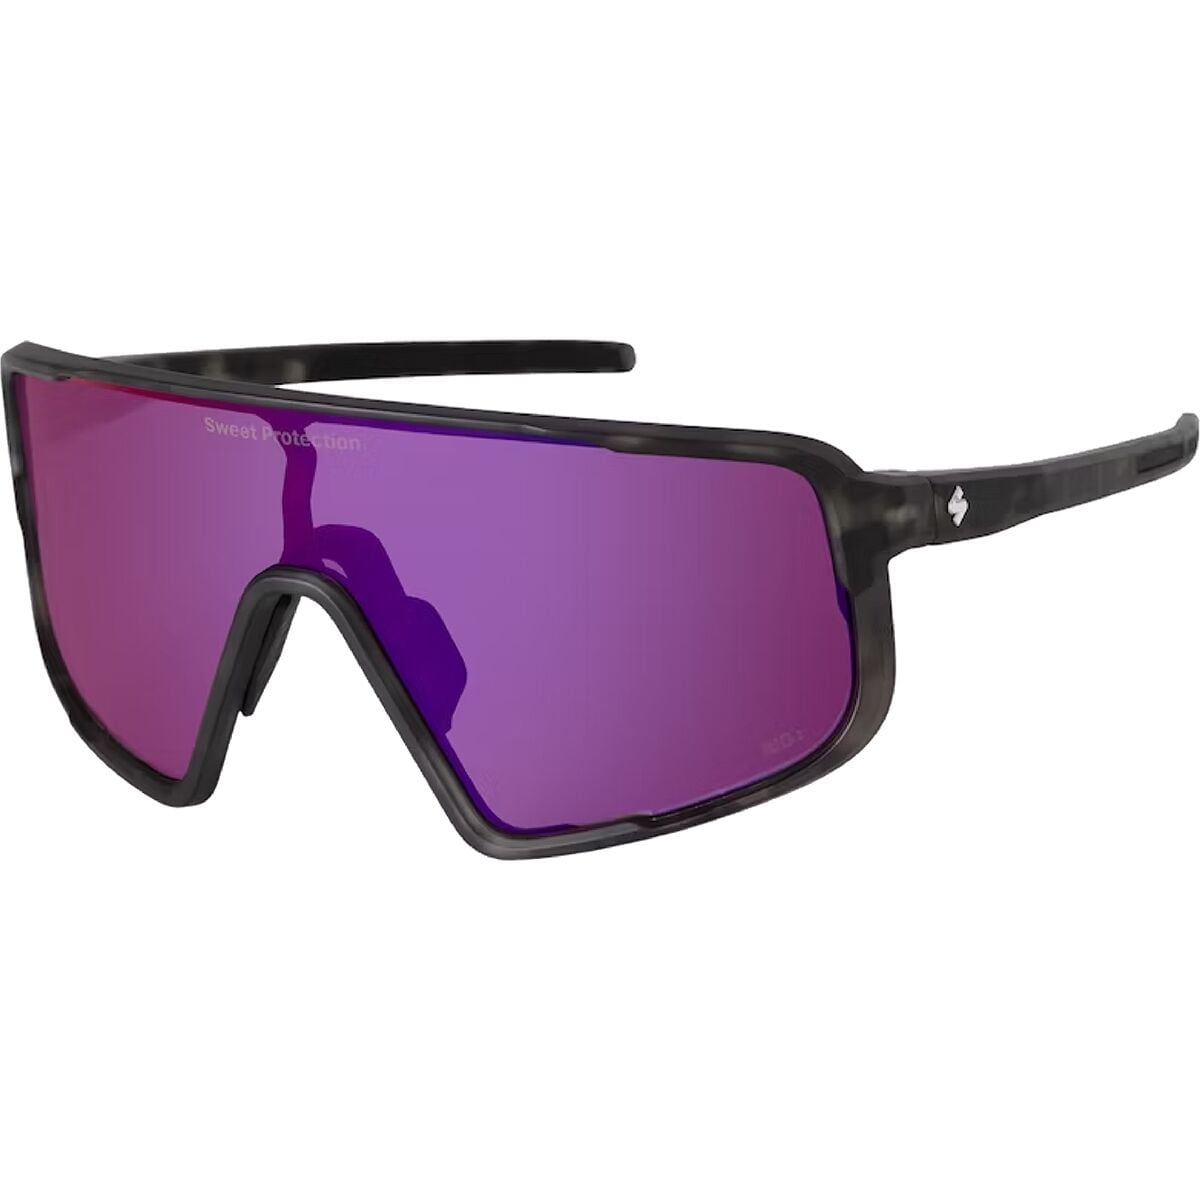 Memento RIG Reflect Sunglasses Sweet Protection